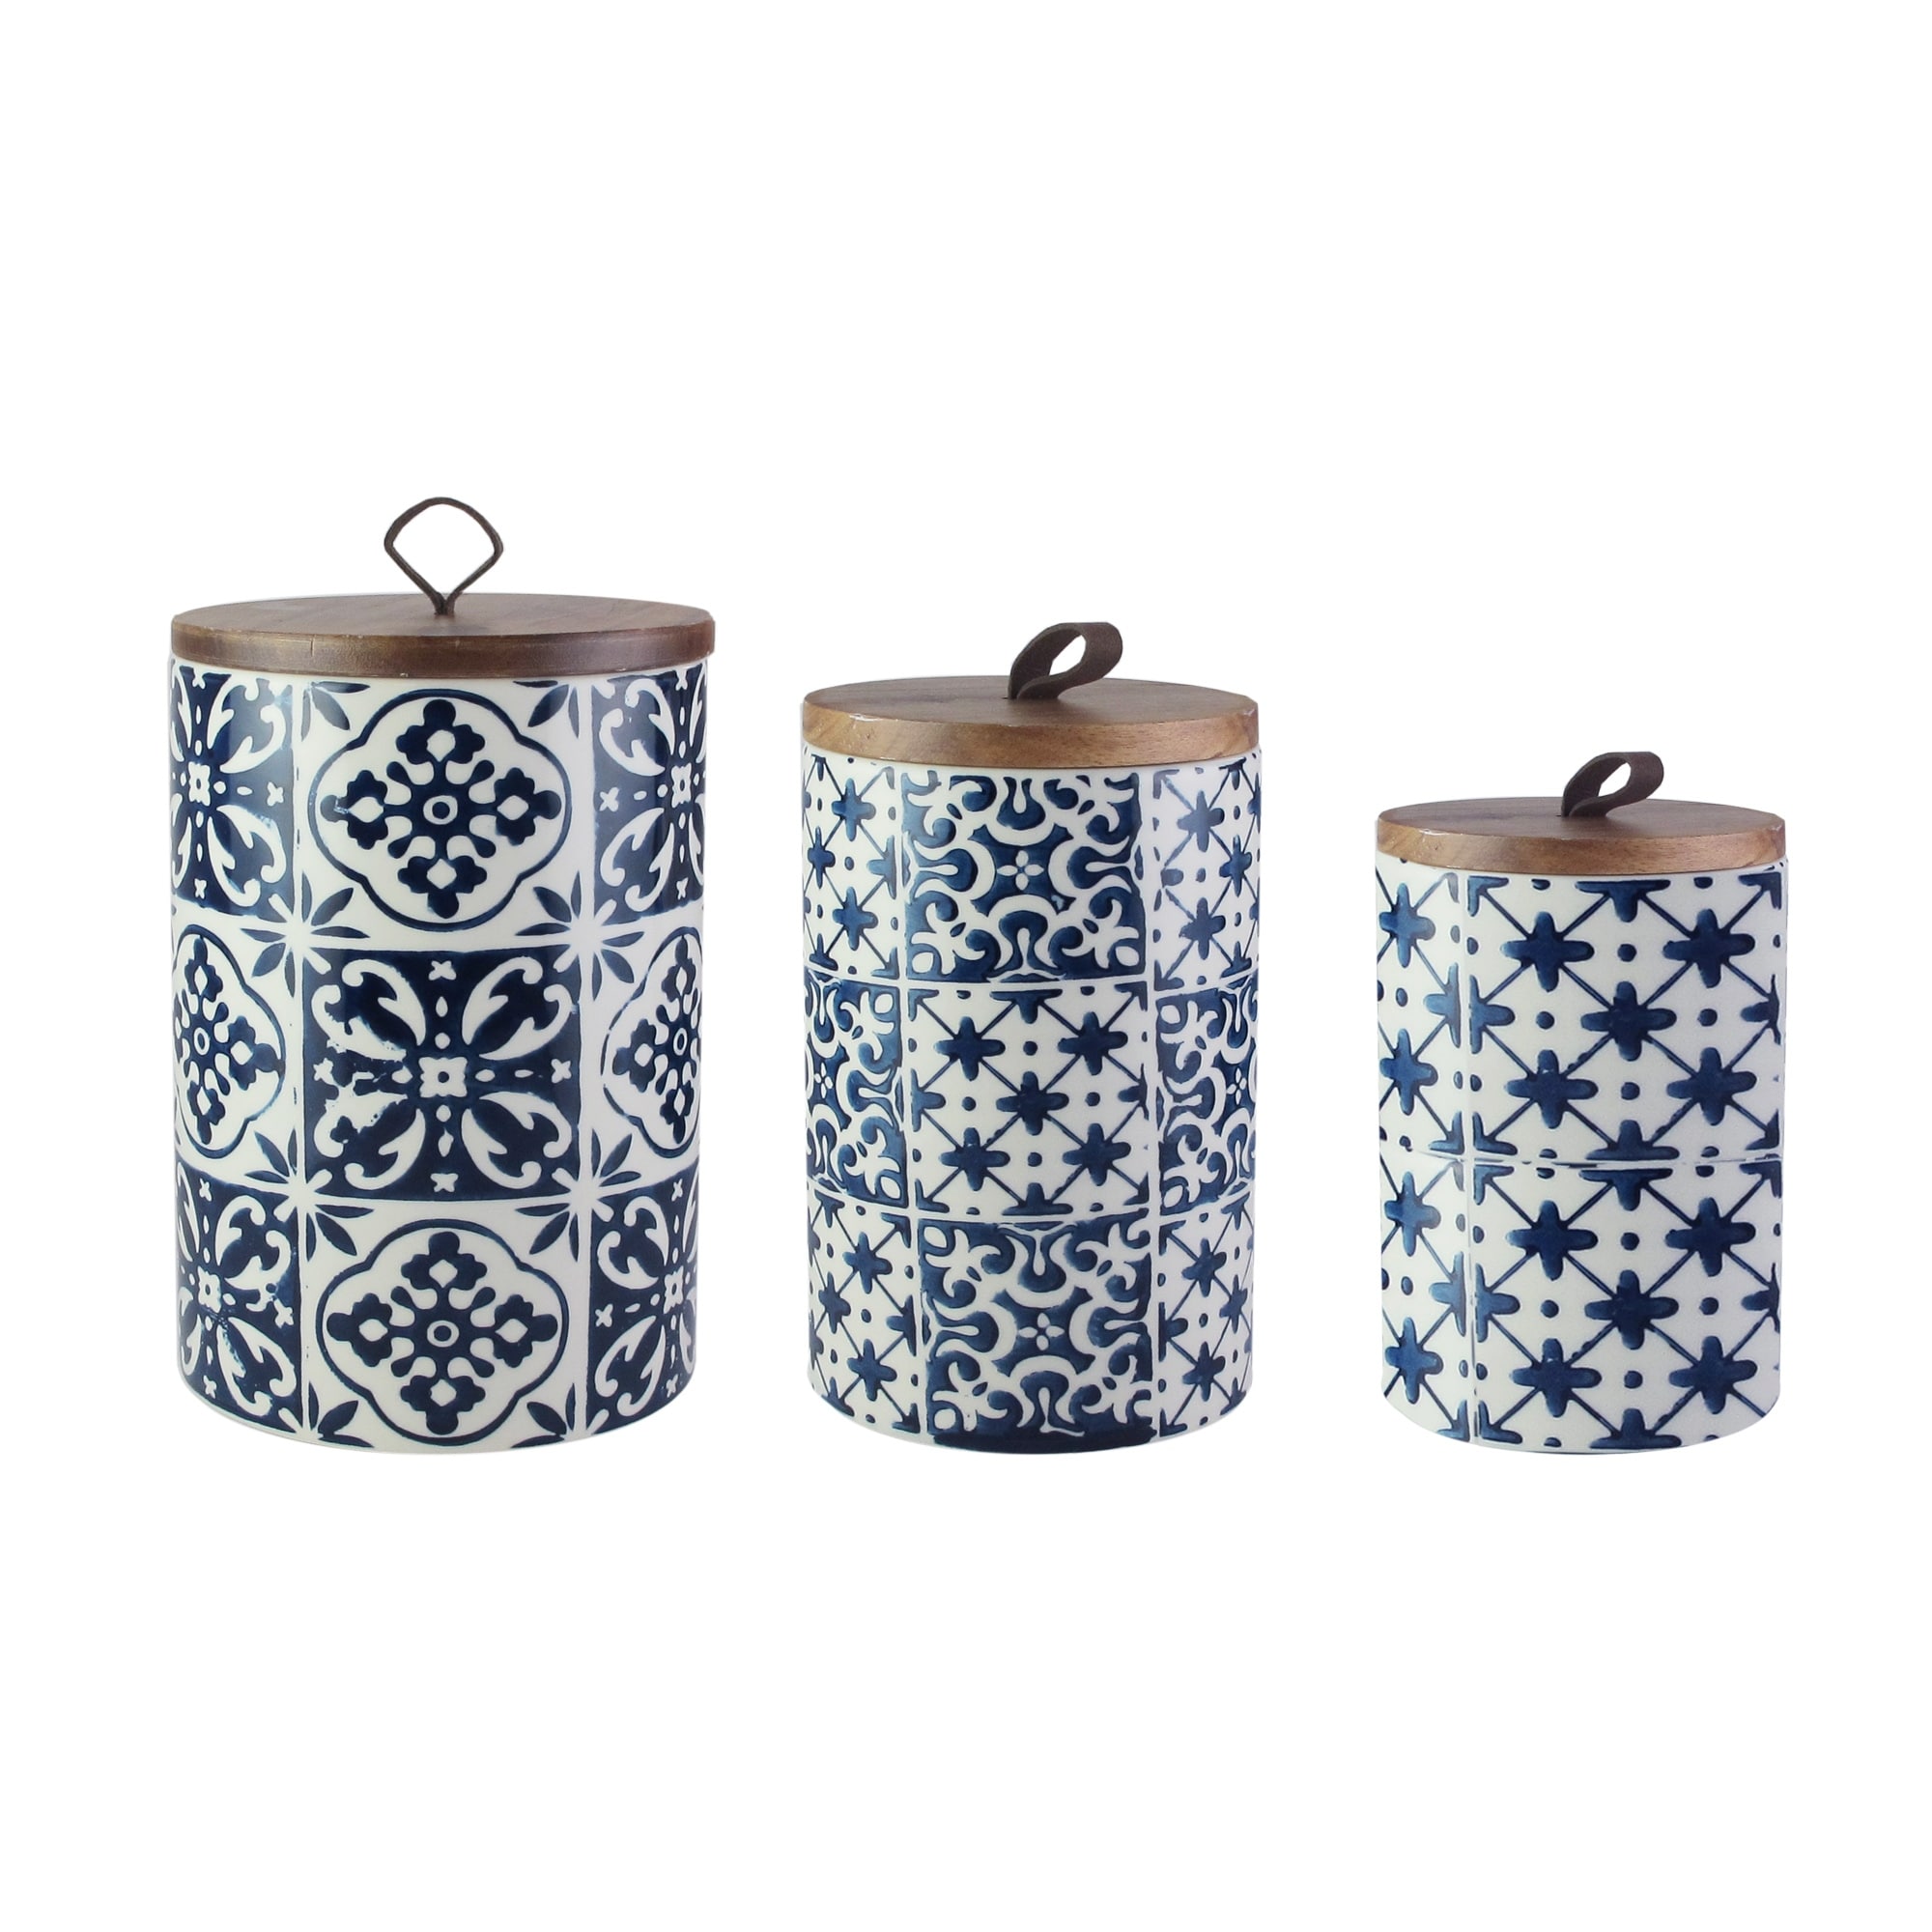 American Atelier Canisters Set of 3 Blue 